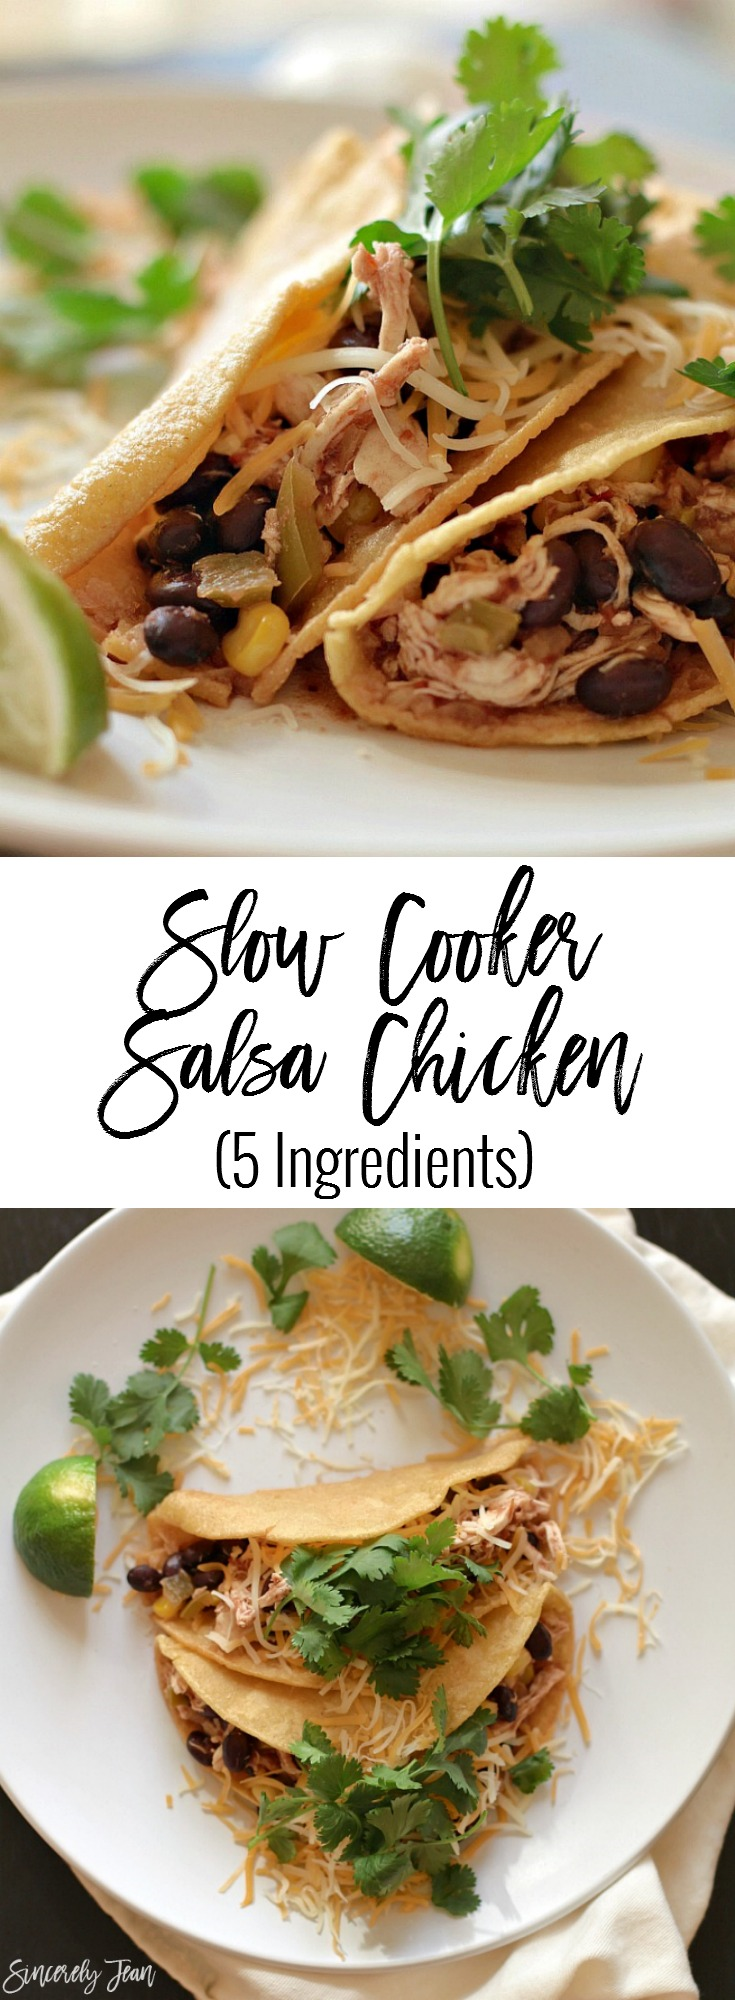 5 Ingredient Slow Cooker Salsa Chicken - Delicious combination of chicken, salsa, corn, and black beans! Quick and simple family dinner recipe! | www.SincerelyJean.com